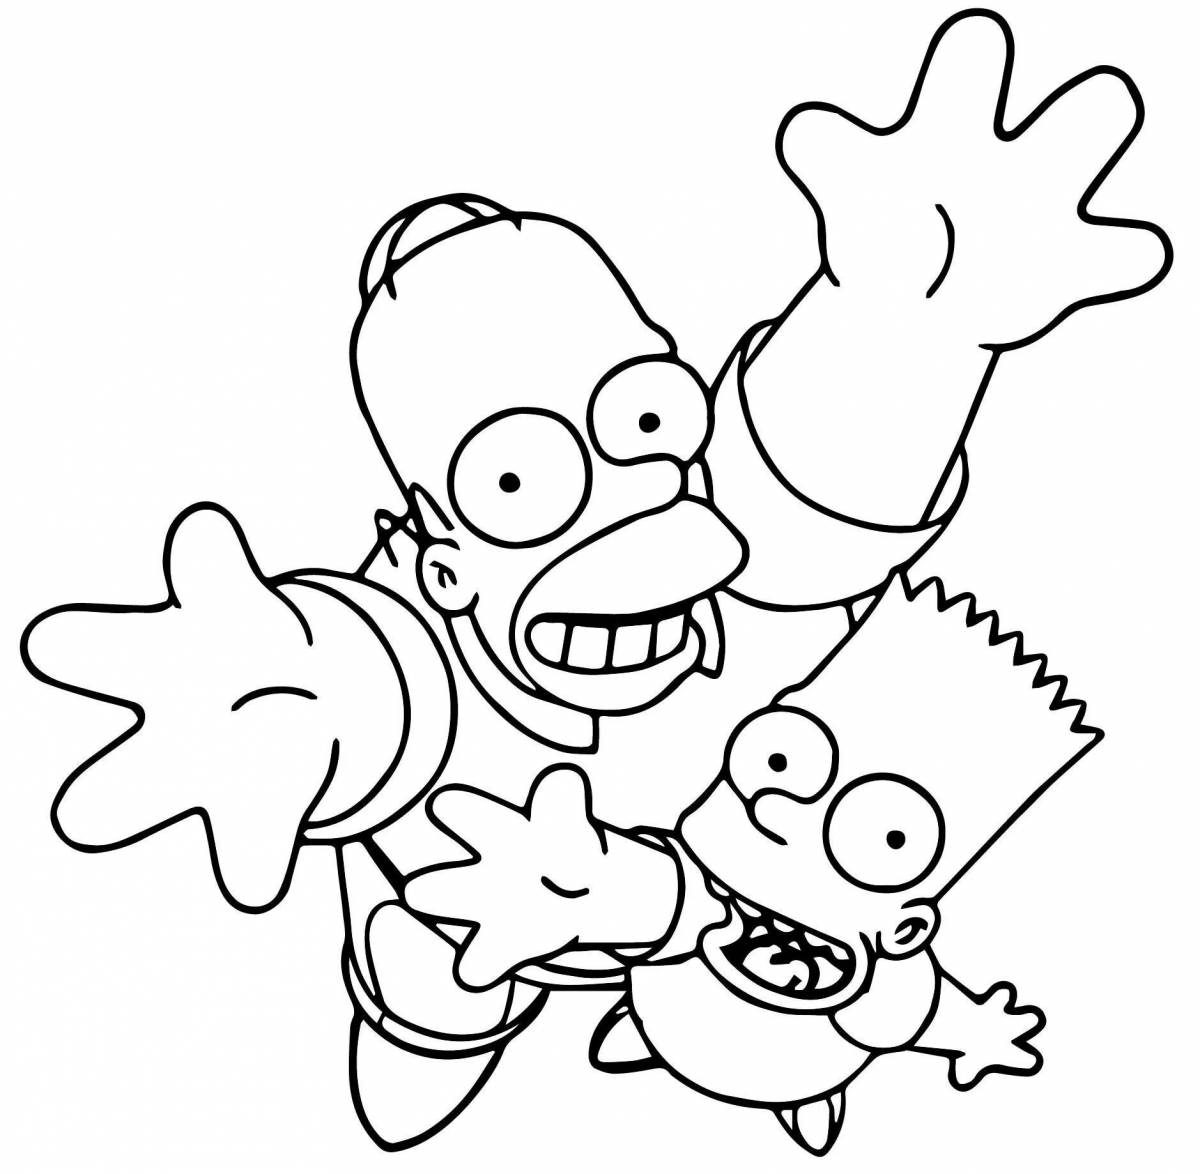 Bart sparkle coloring book